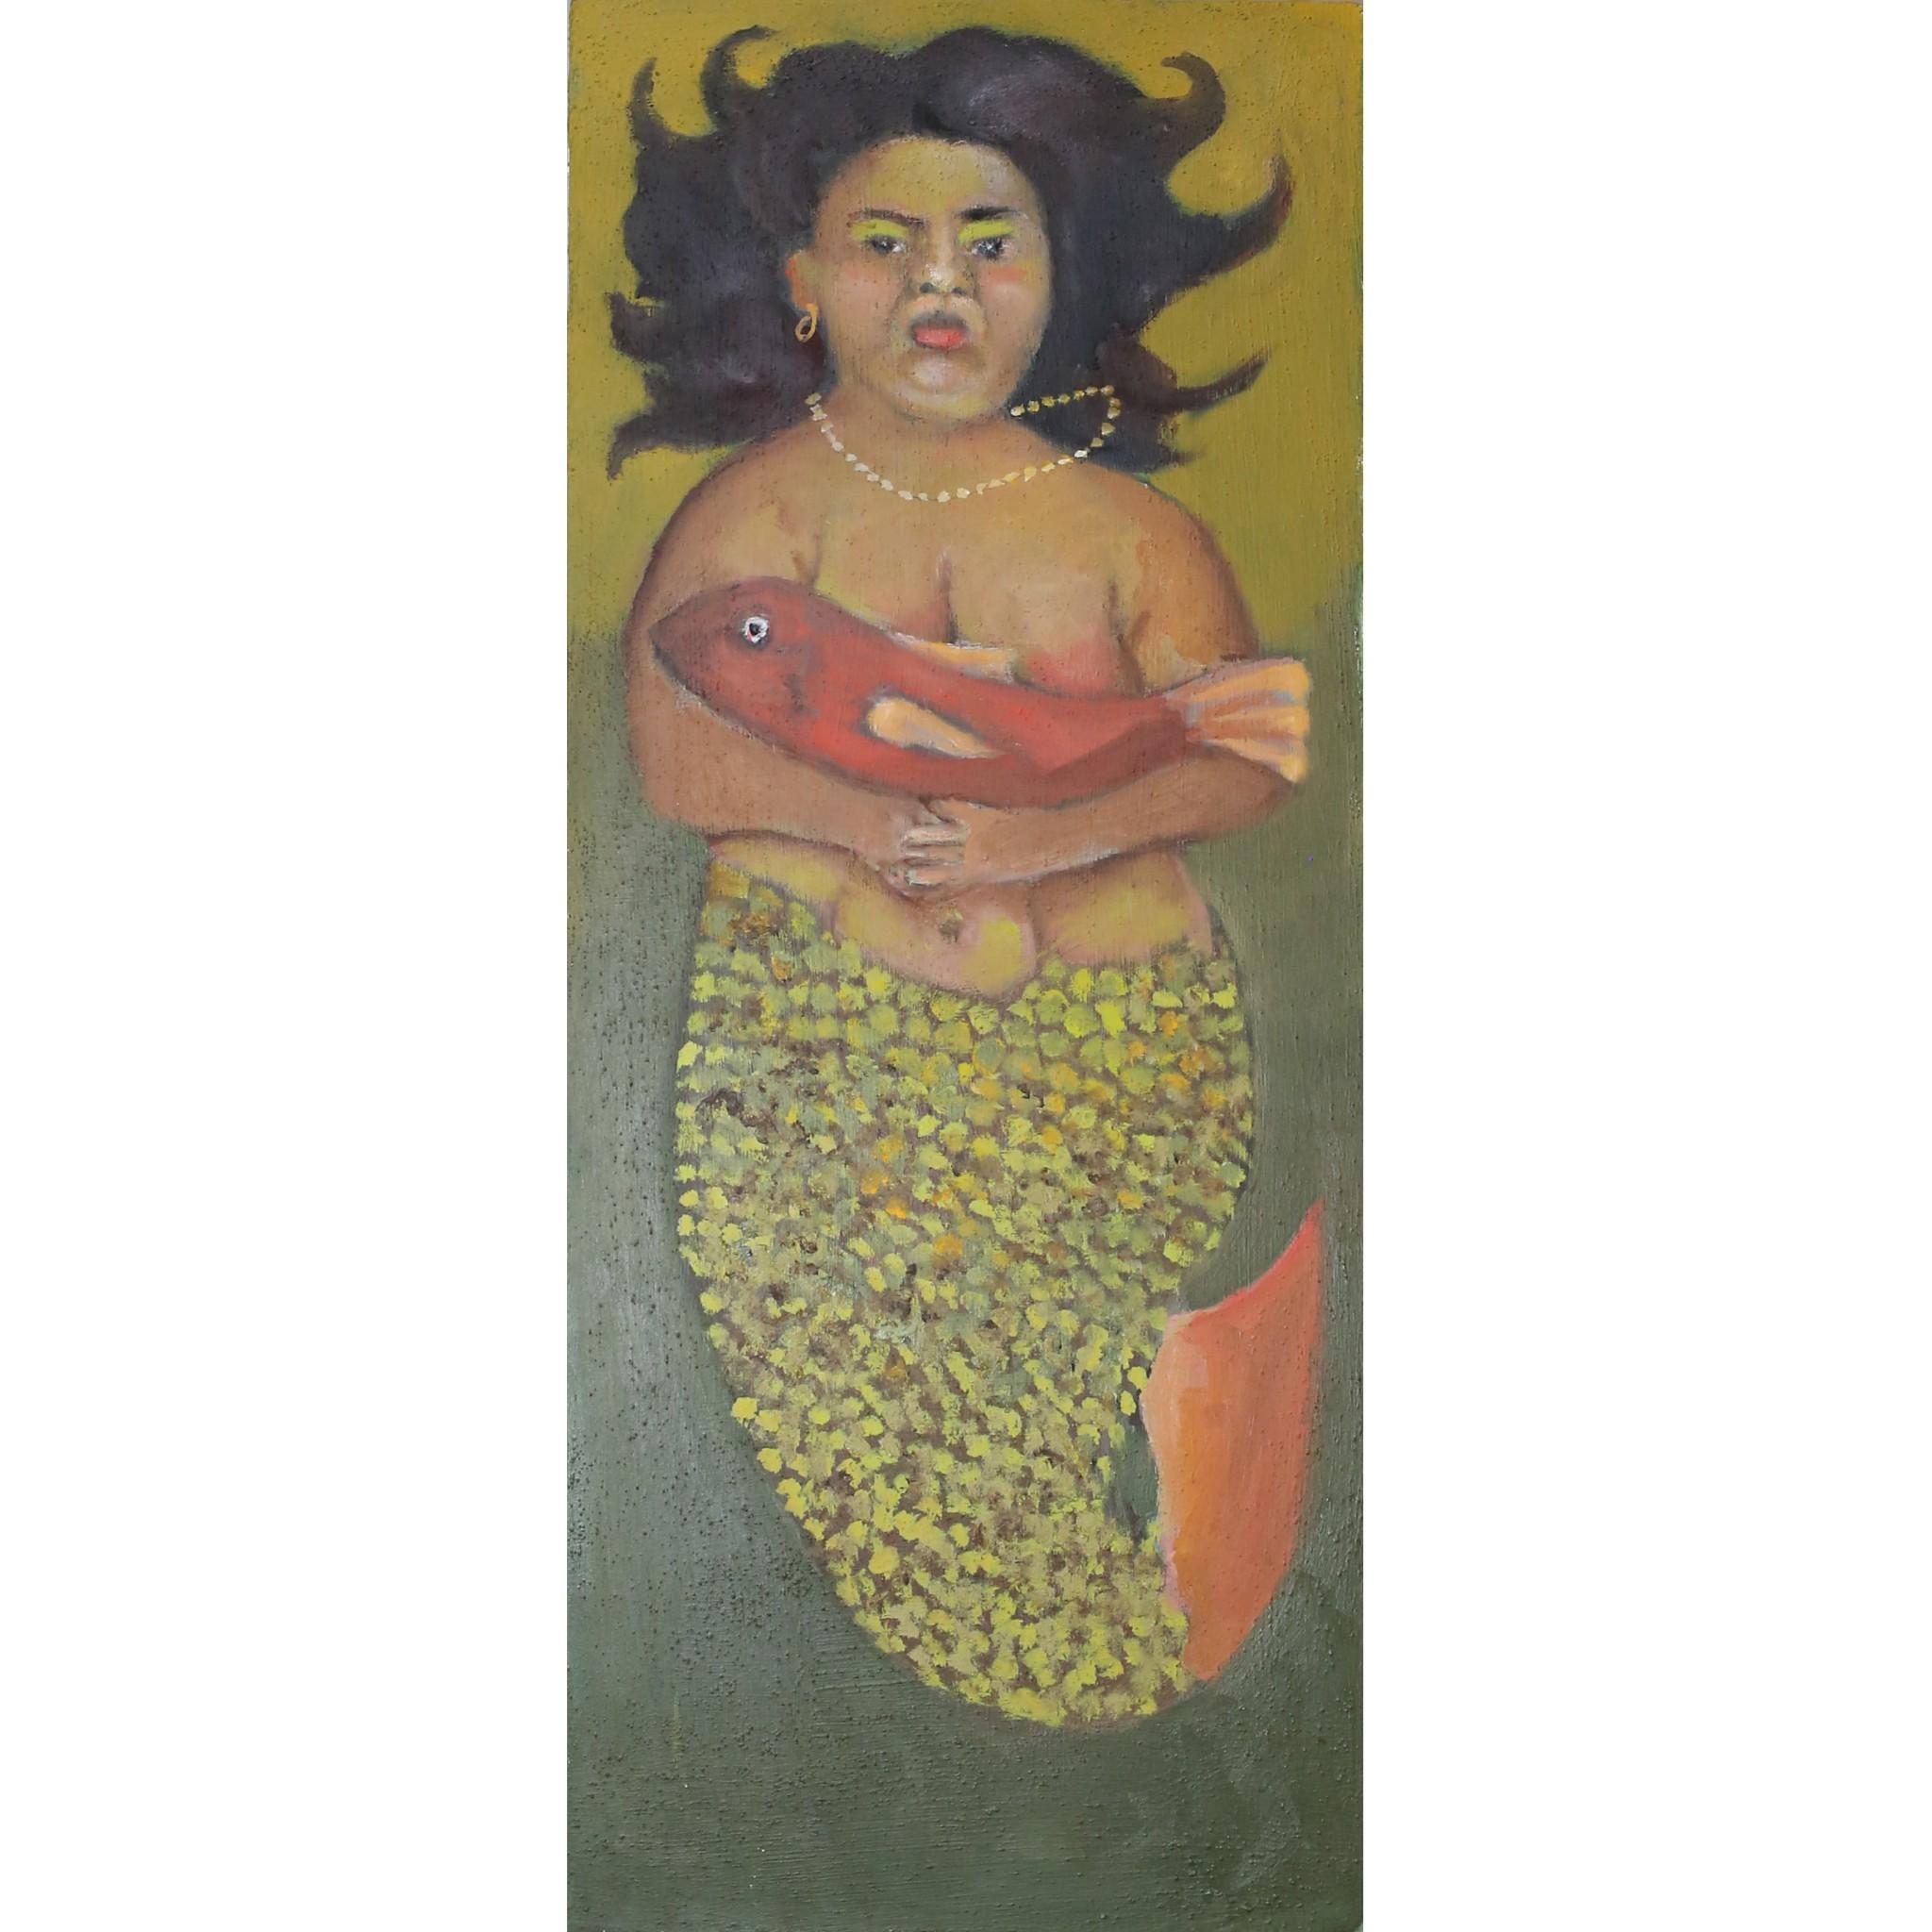 Stephen Basso Figurative Painting - Mermaid and Fish mythical siren theme warm colors very expressive countenance 